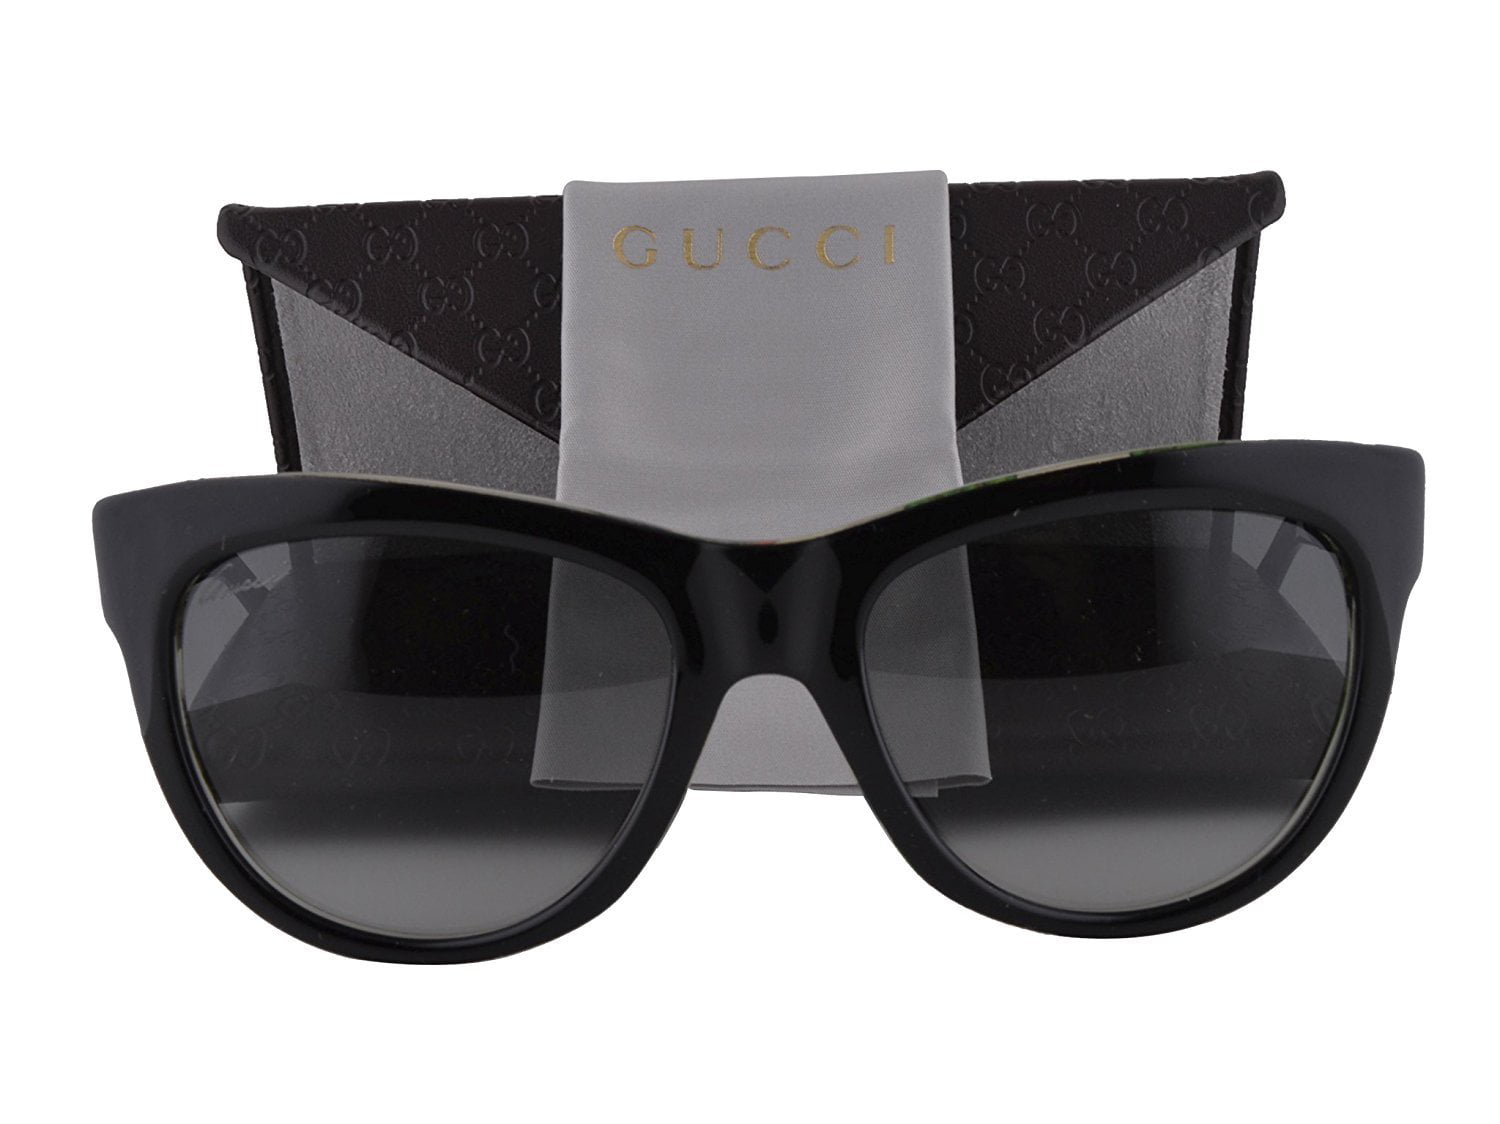 Gucci GG 3739/S Sunglasses Black Floral Crystal w/Gray Gradient Lens ...